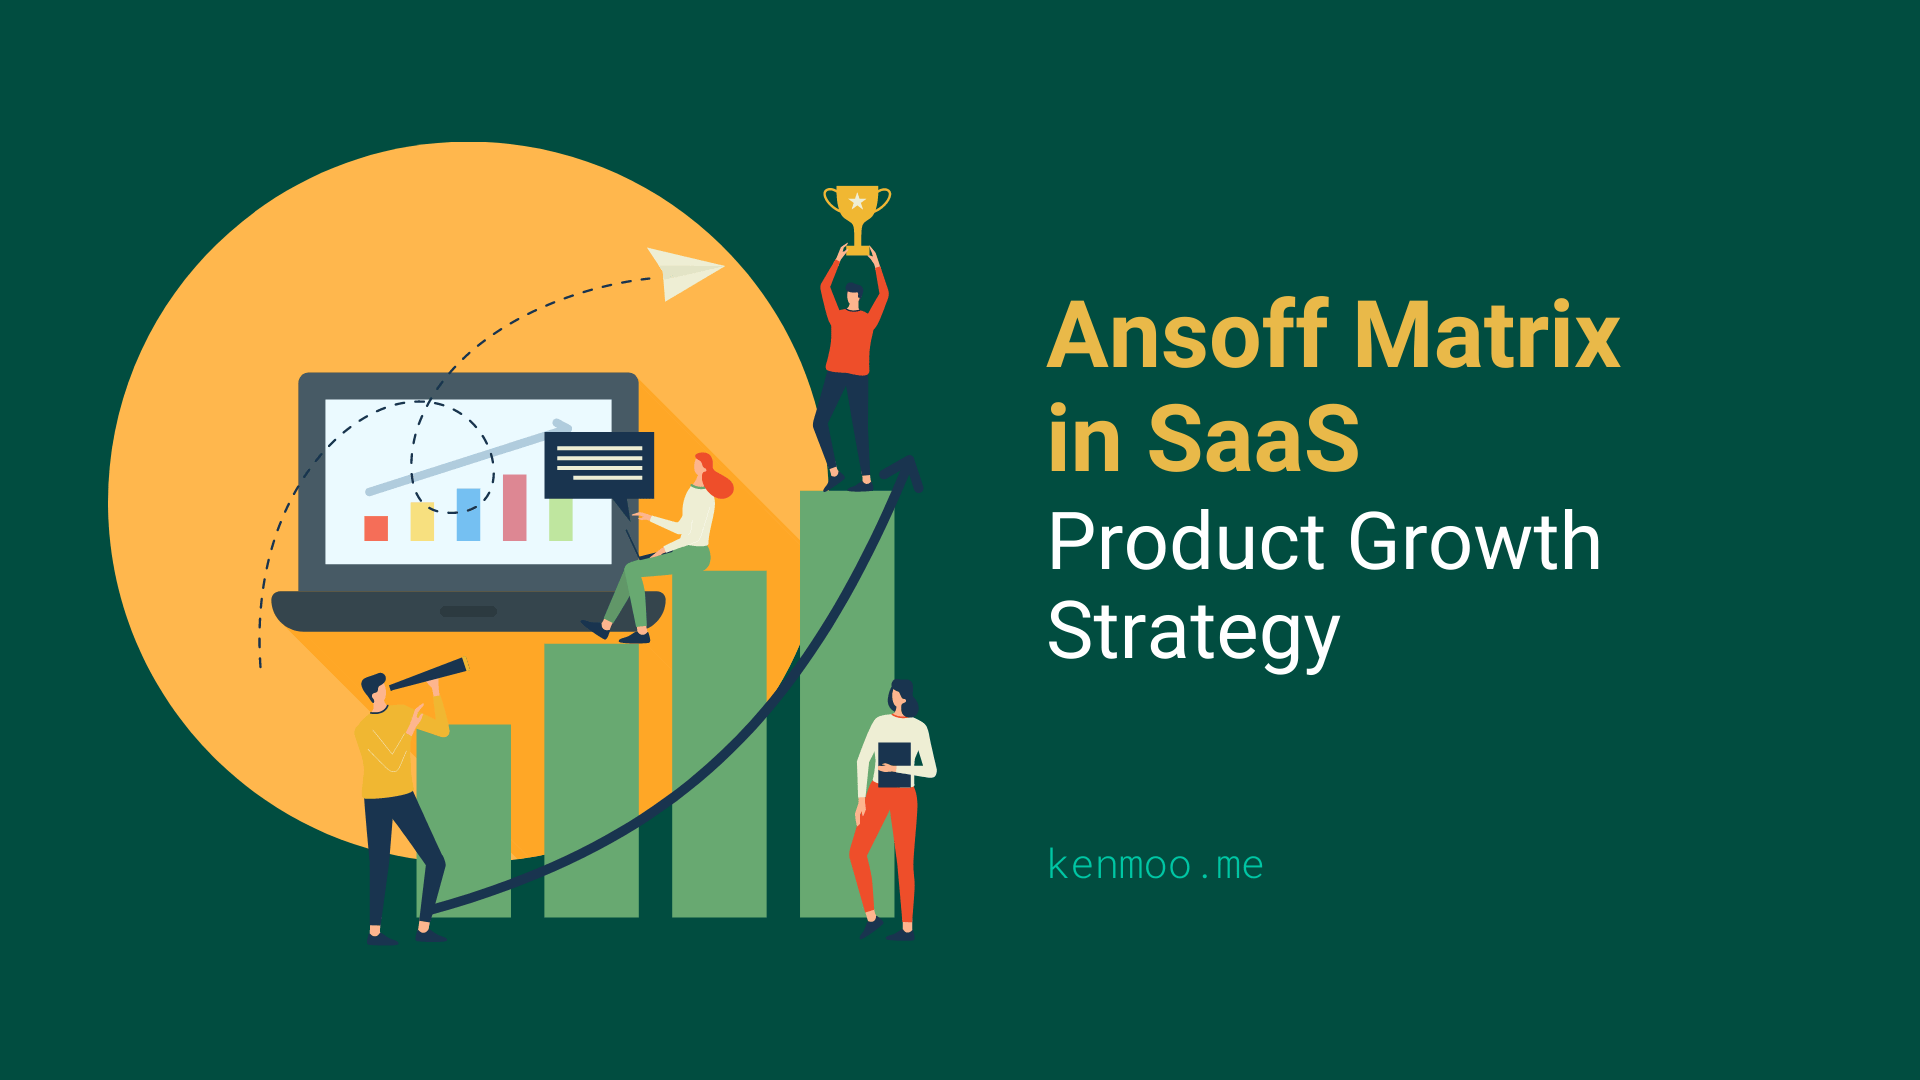 Ansoff Matrix in SaaS: Product Growth Strategy